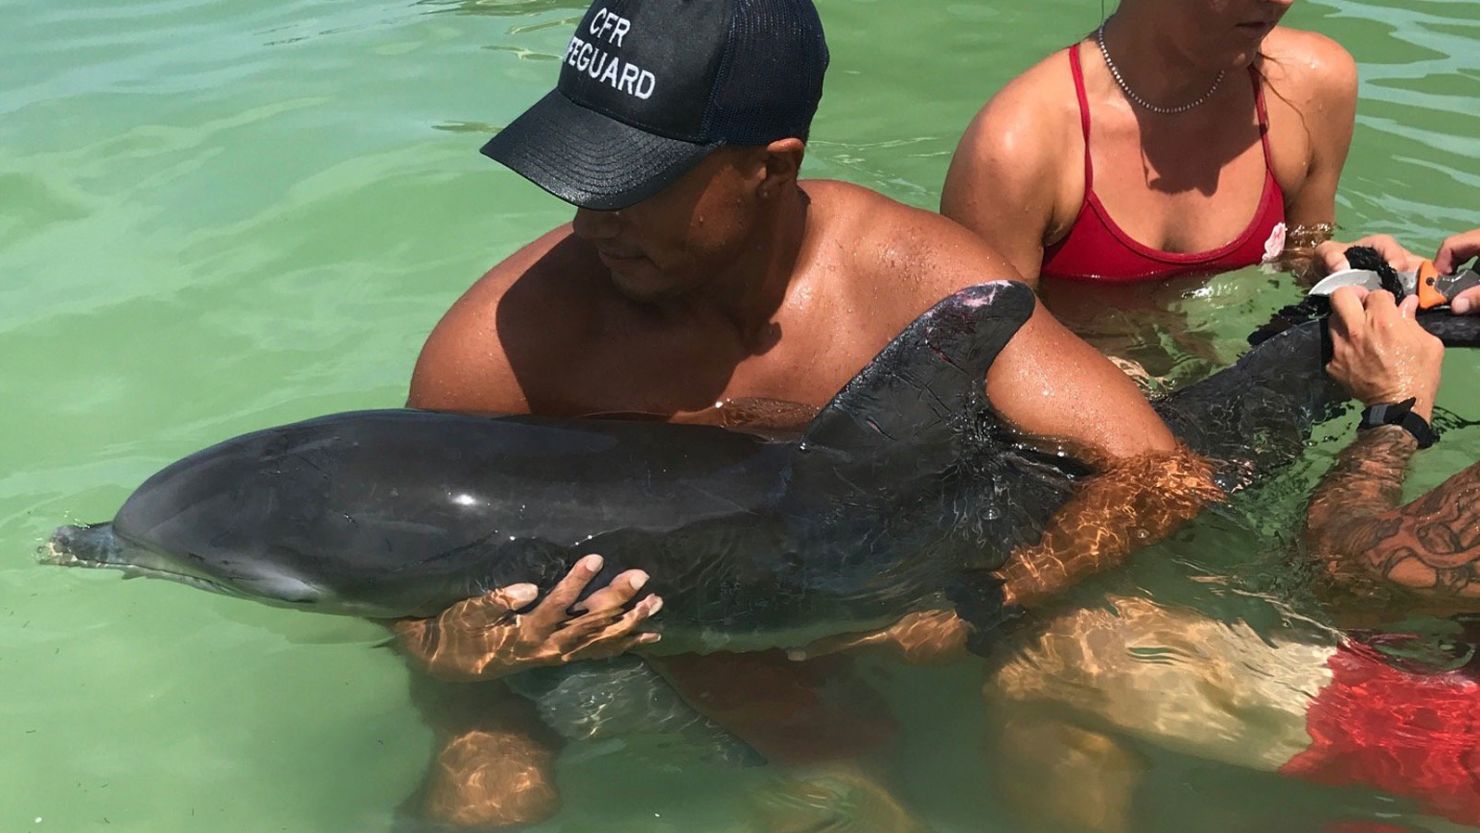 Lifeguards untangled the dolphin from a crab trap, officials said.